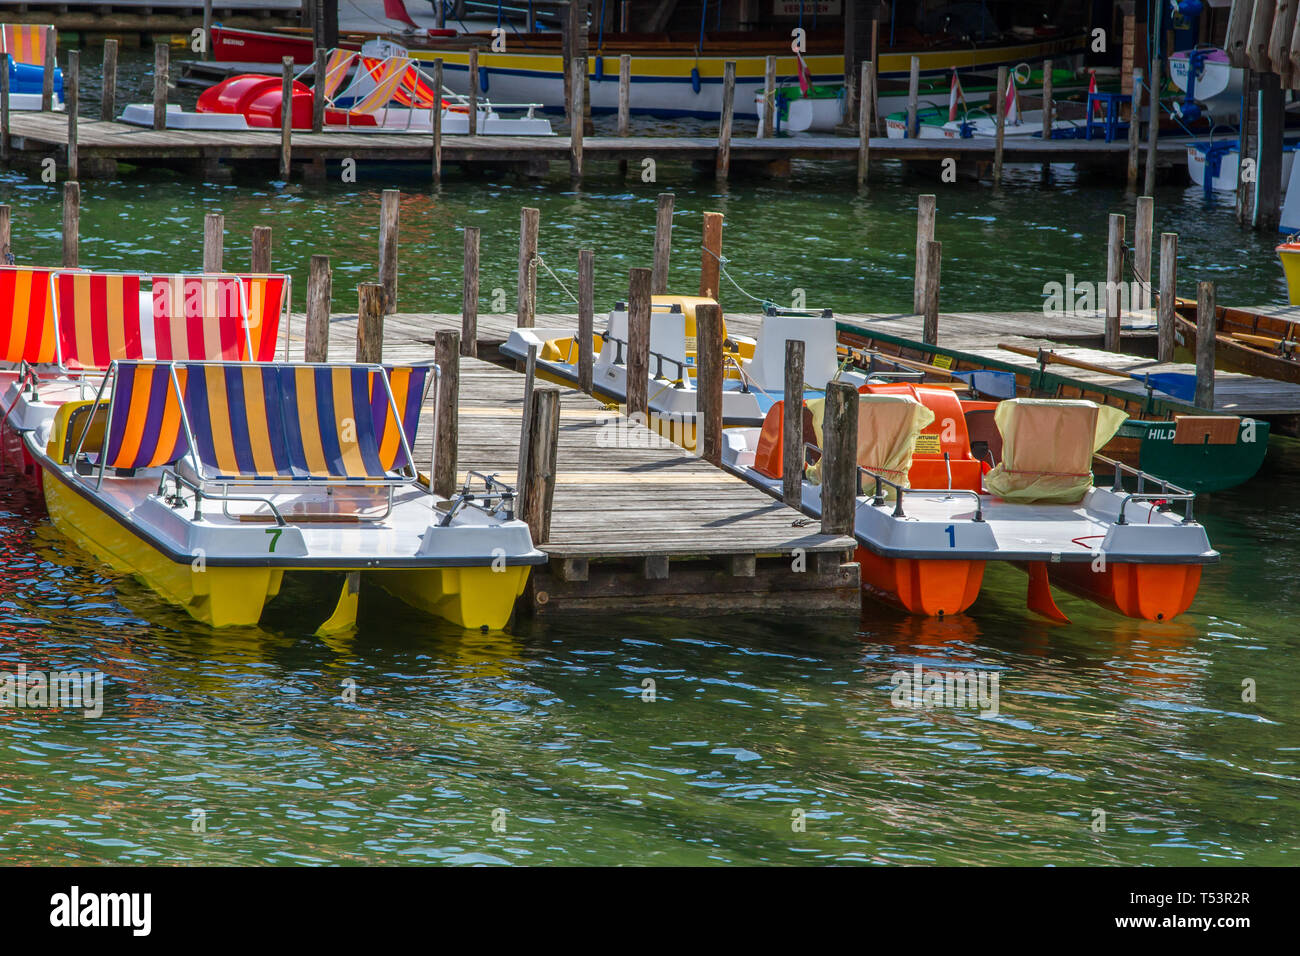 Boote (boats) - Lunzer See, Lunz am See, Austria Stock Photo